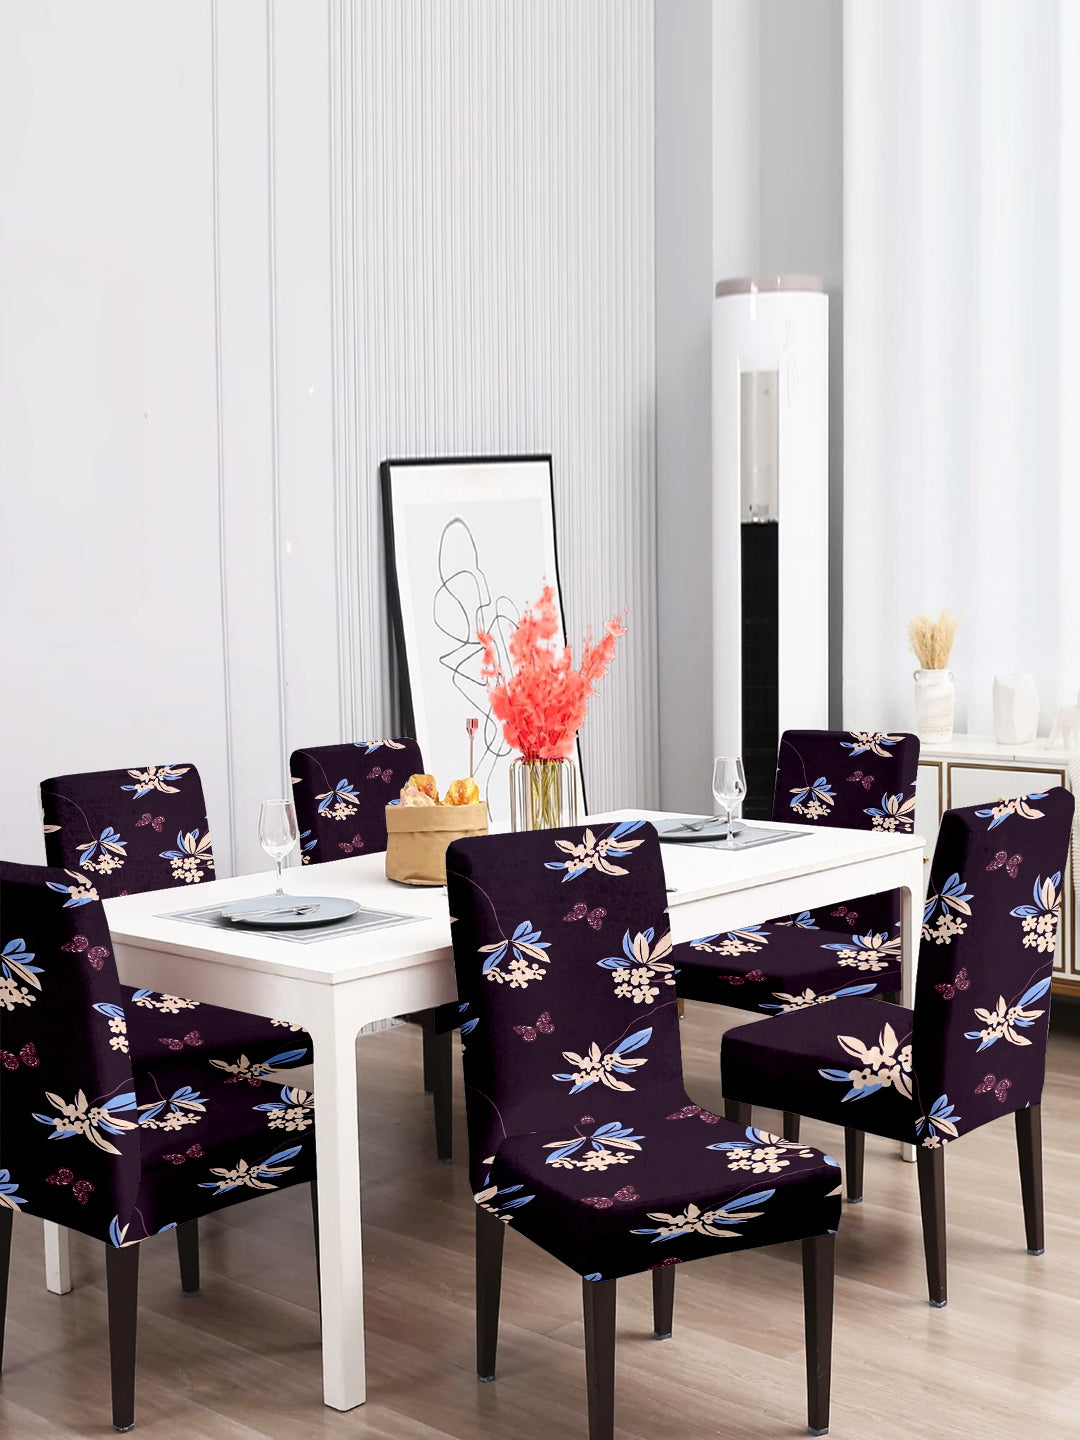 Stretchable DiningPrinted Chair Cover Set-6 Purple